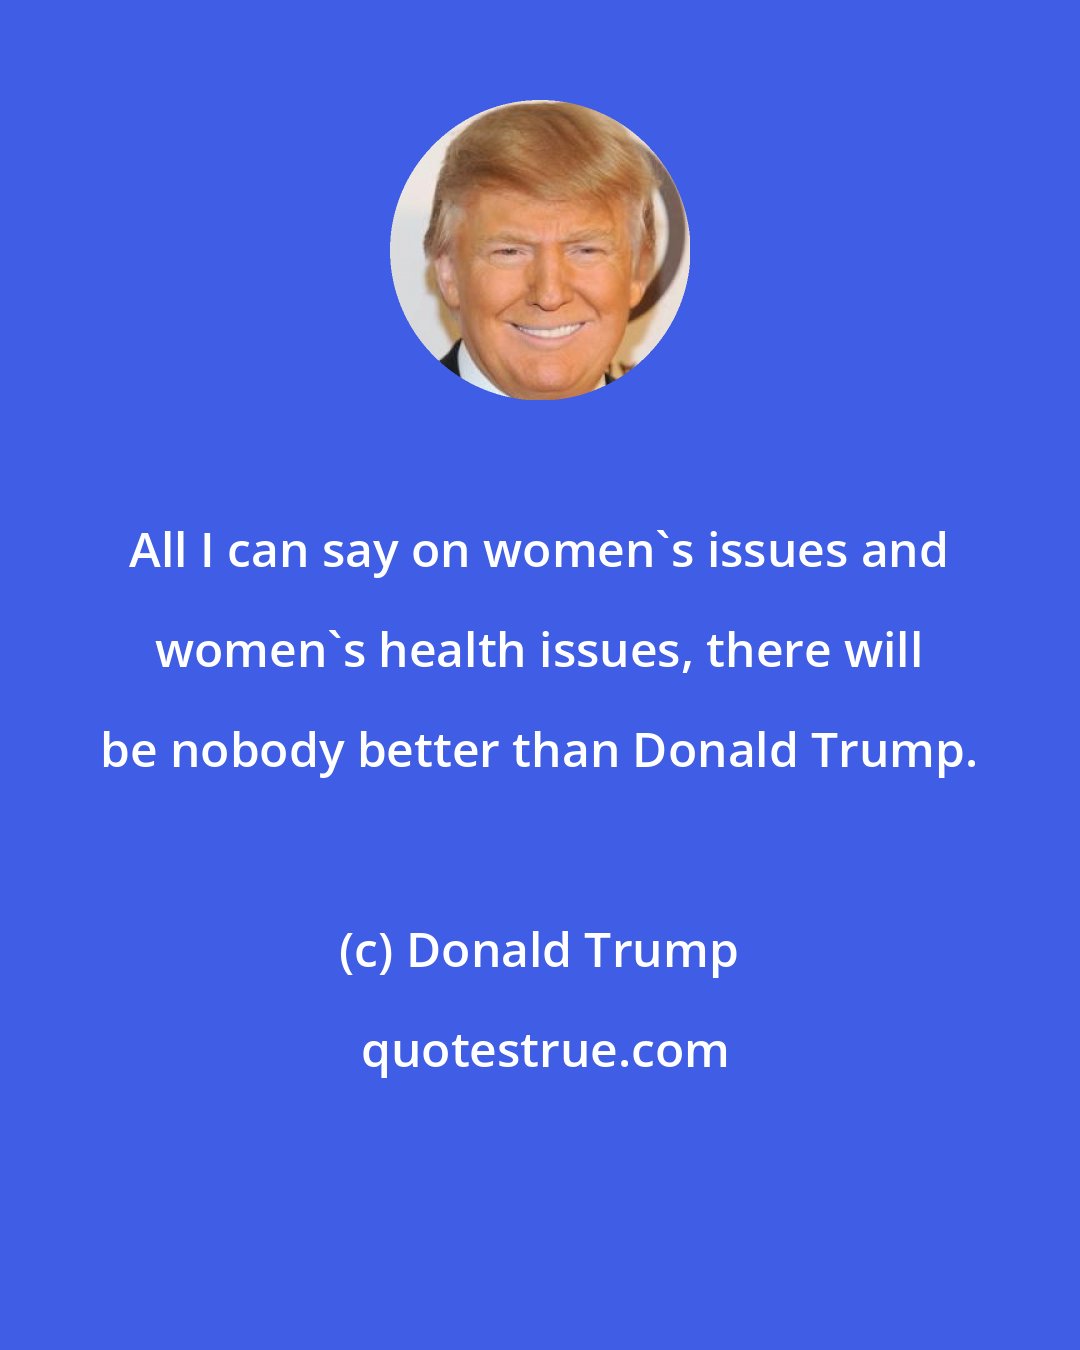 Donald Trump: All I can say on women's issues and women's health issues, there will be nobody better than Donald Trump.